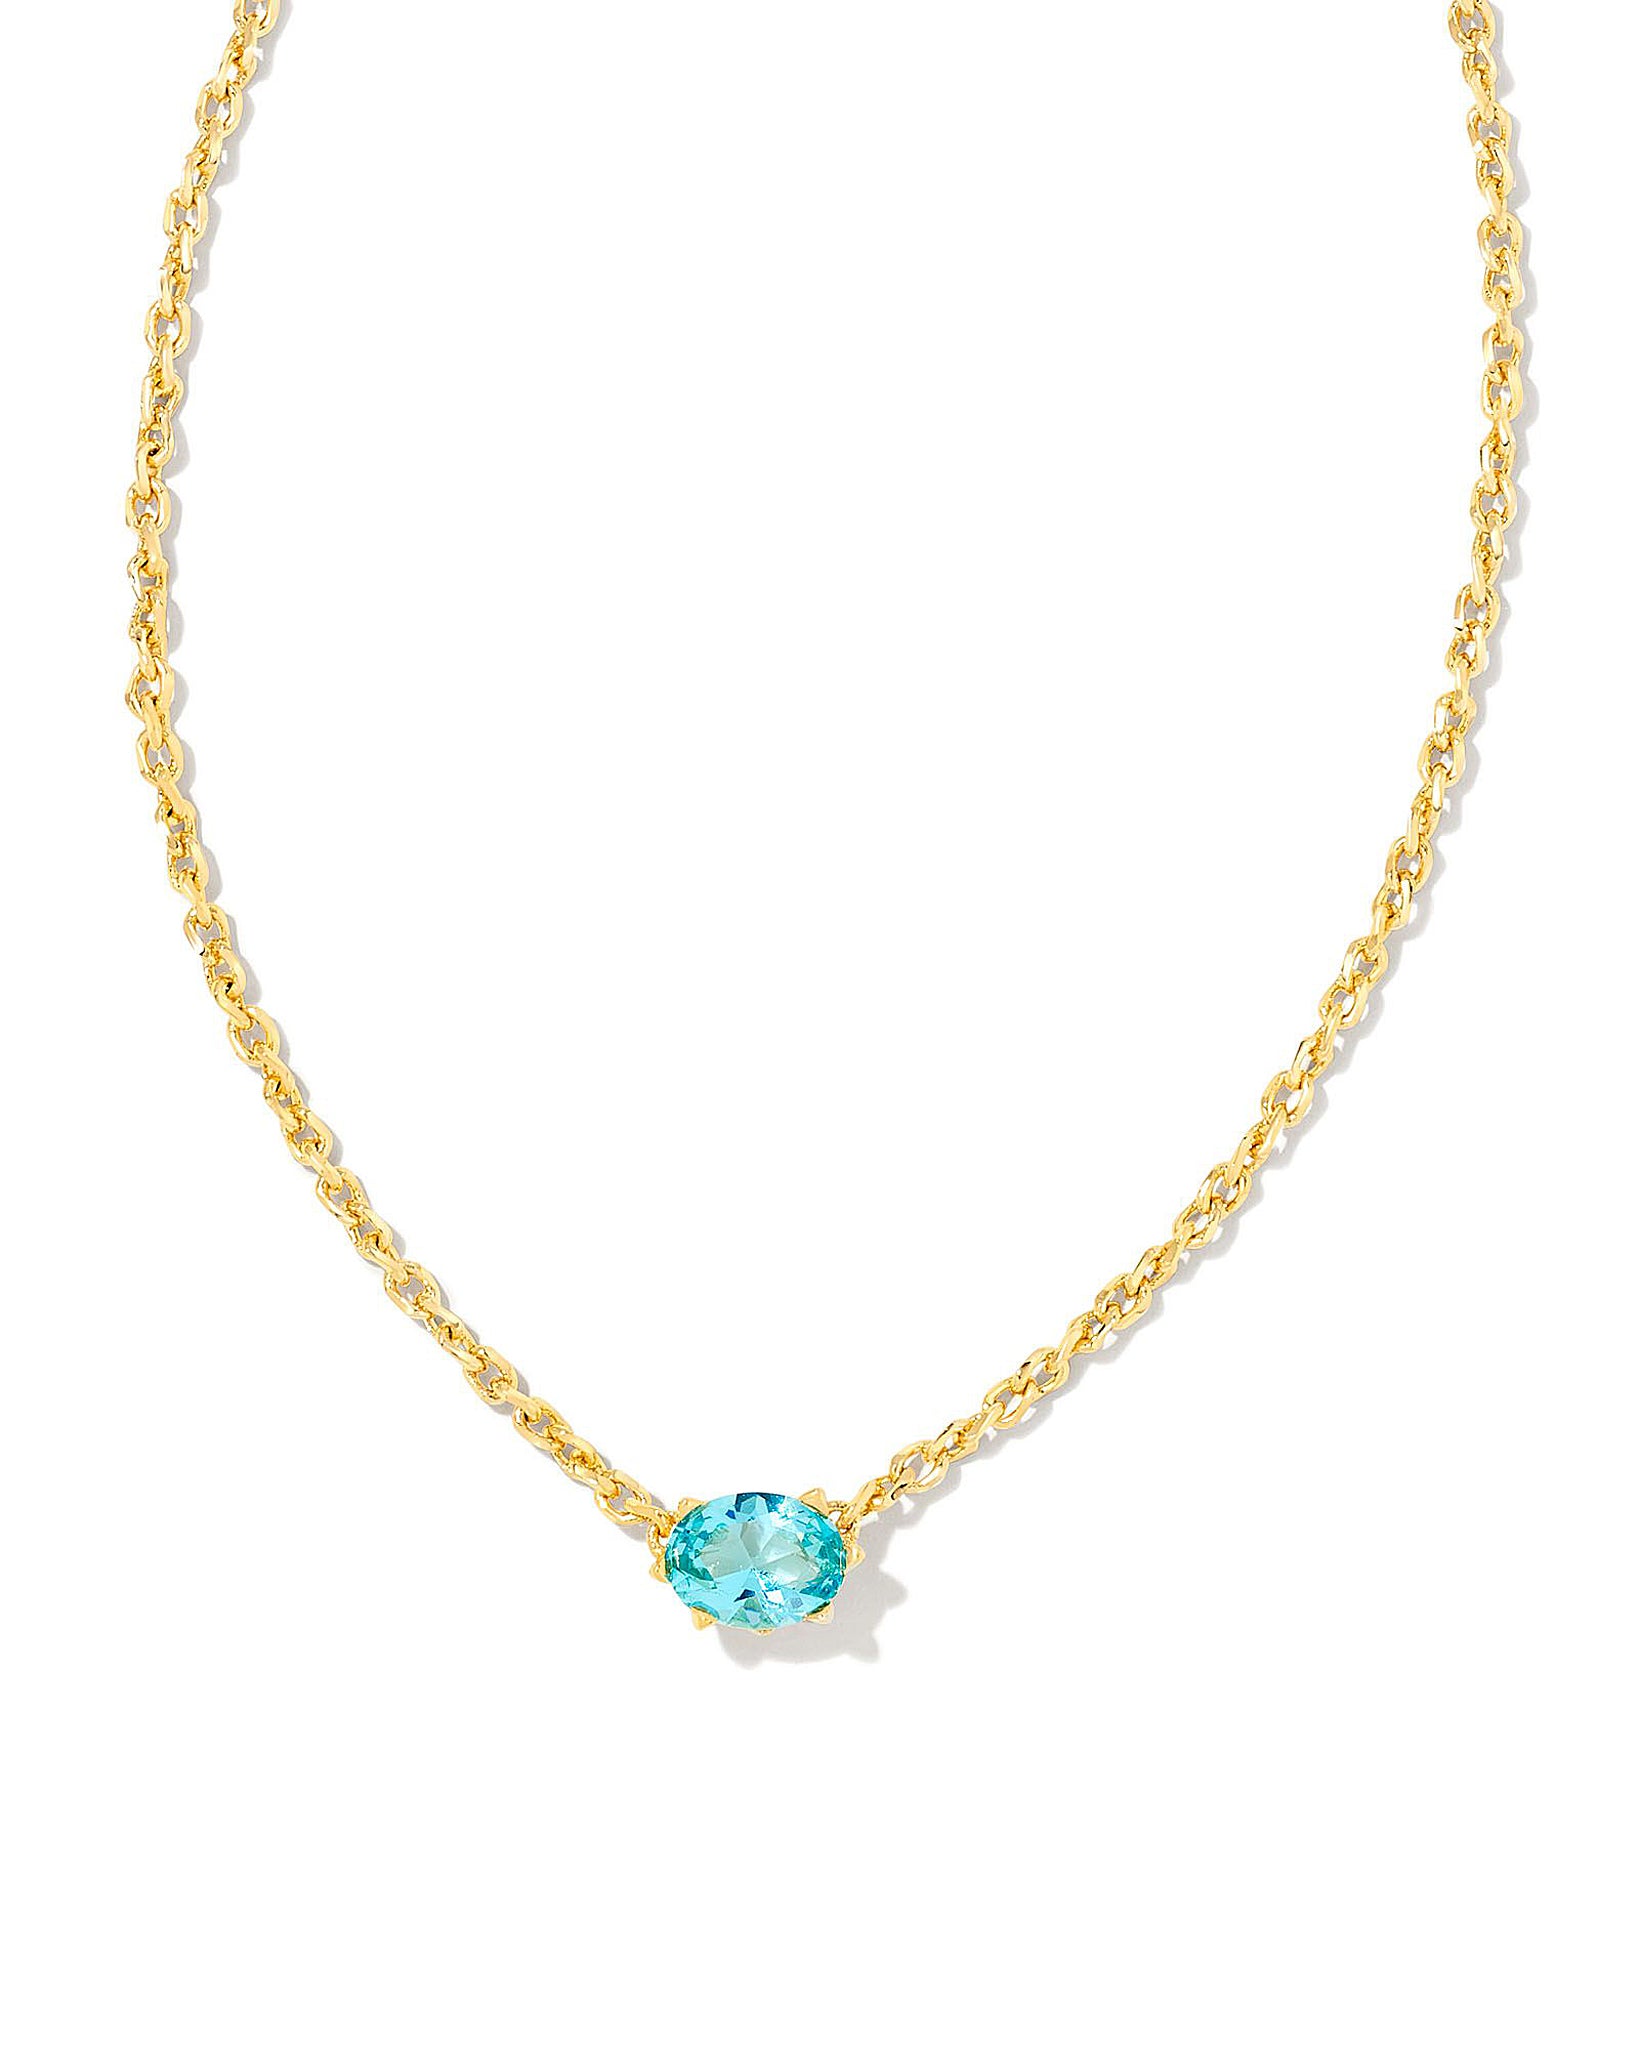 Kendra Scott Cailin Oval Pendant Necklace in Aqua Crystal and Gold